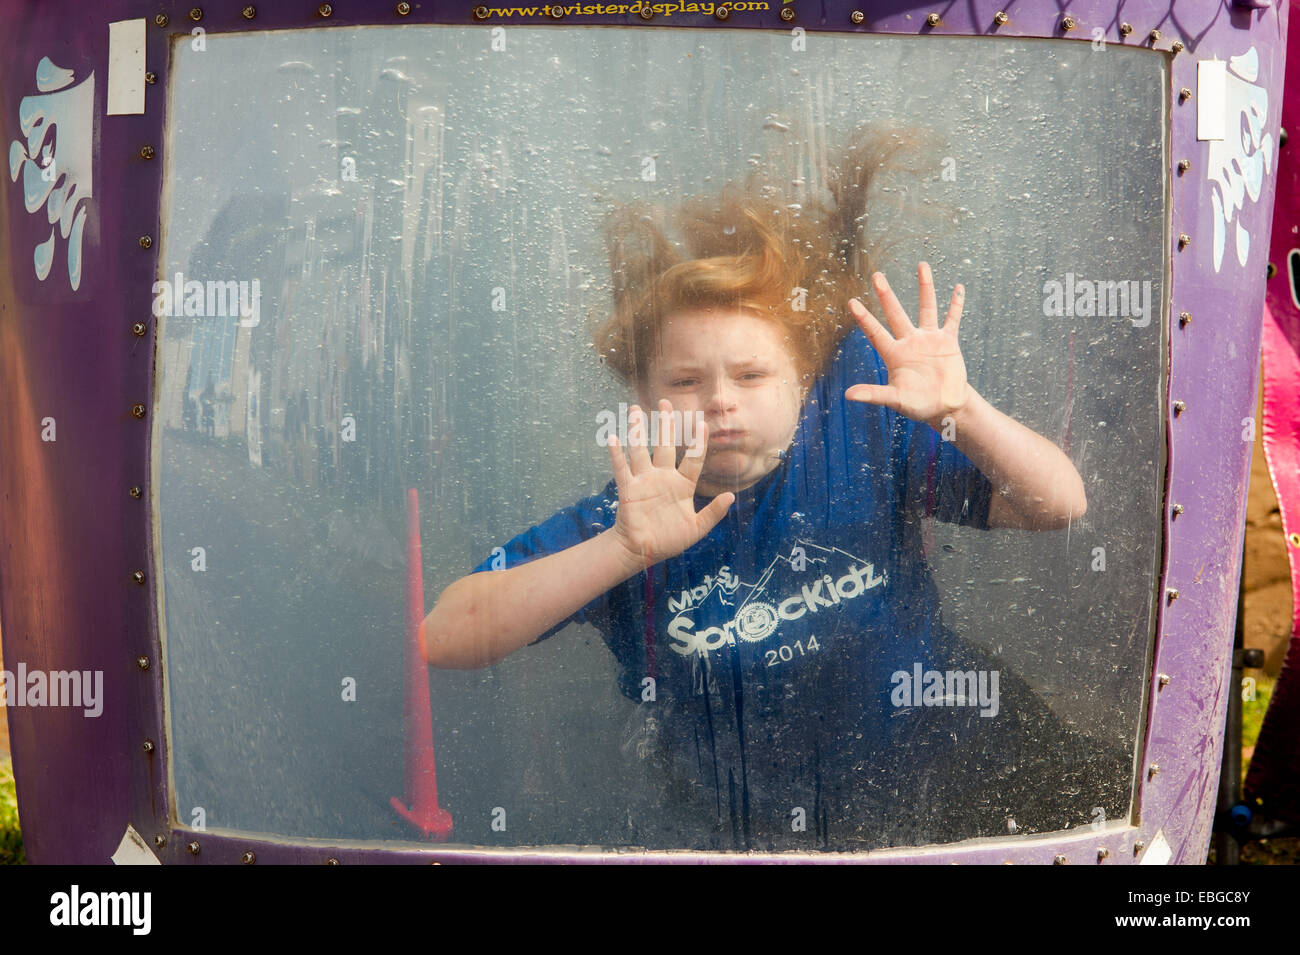 Girl being dunked into a bin of water at an event in Alaska Stock Photo